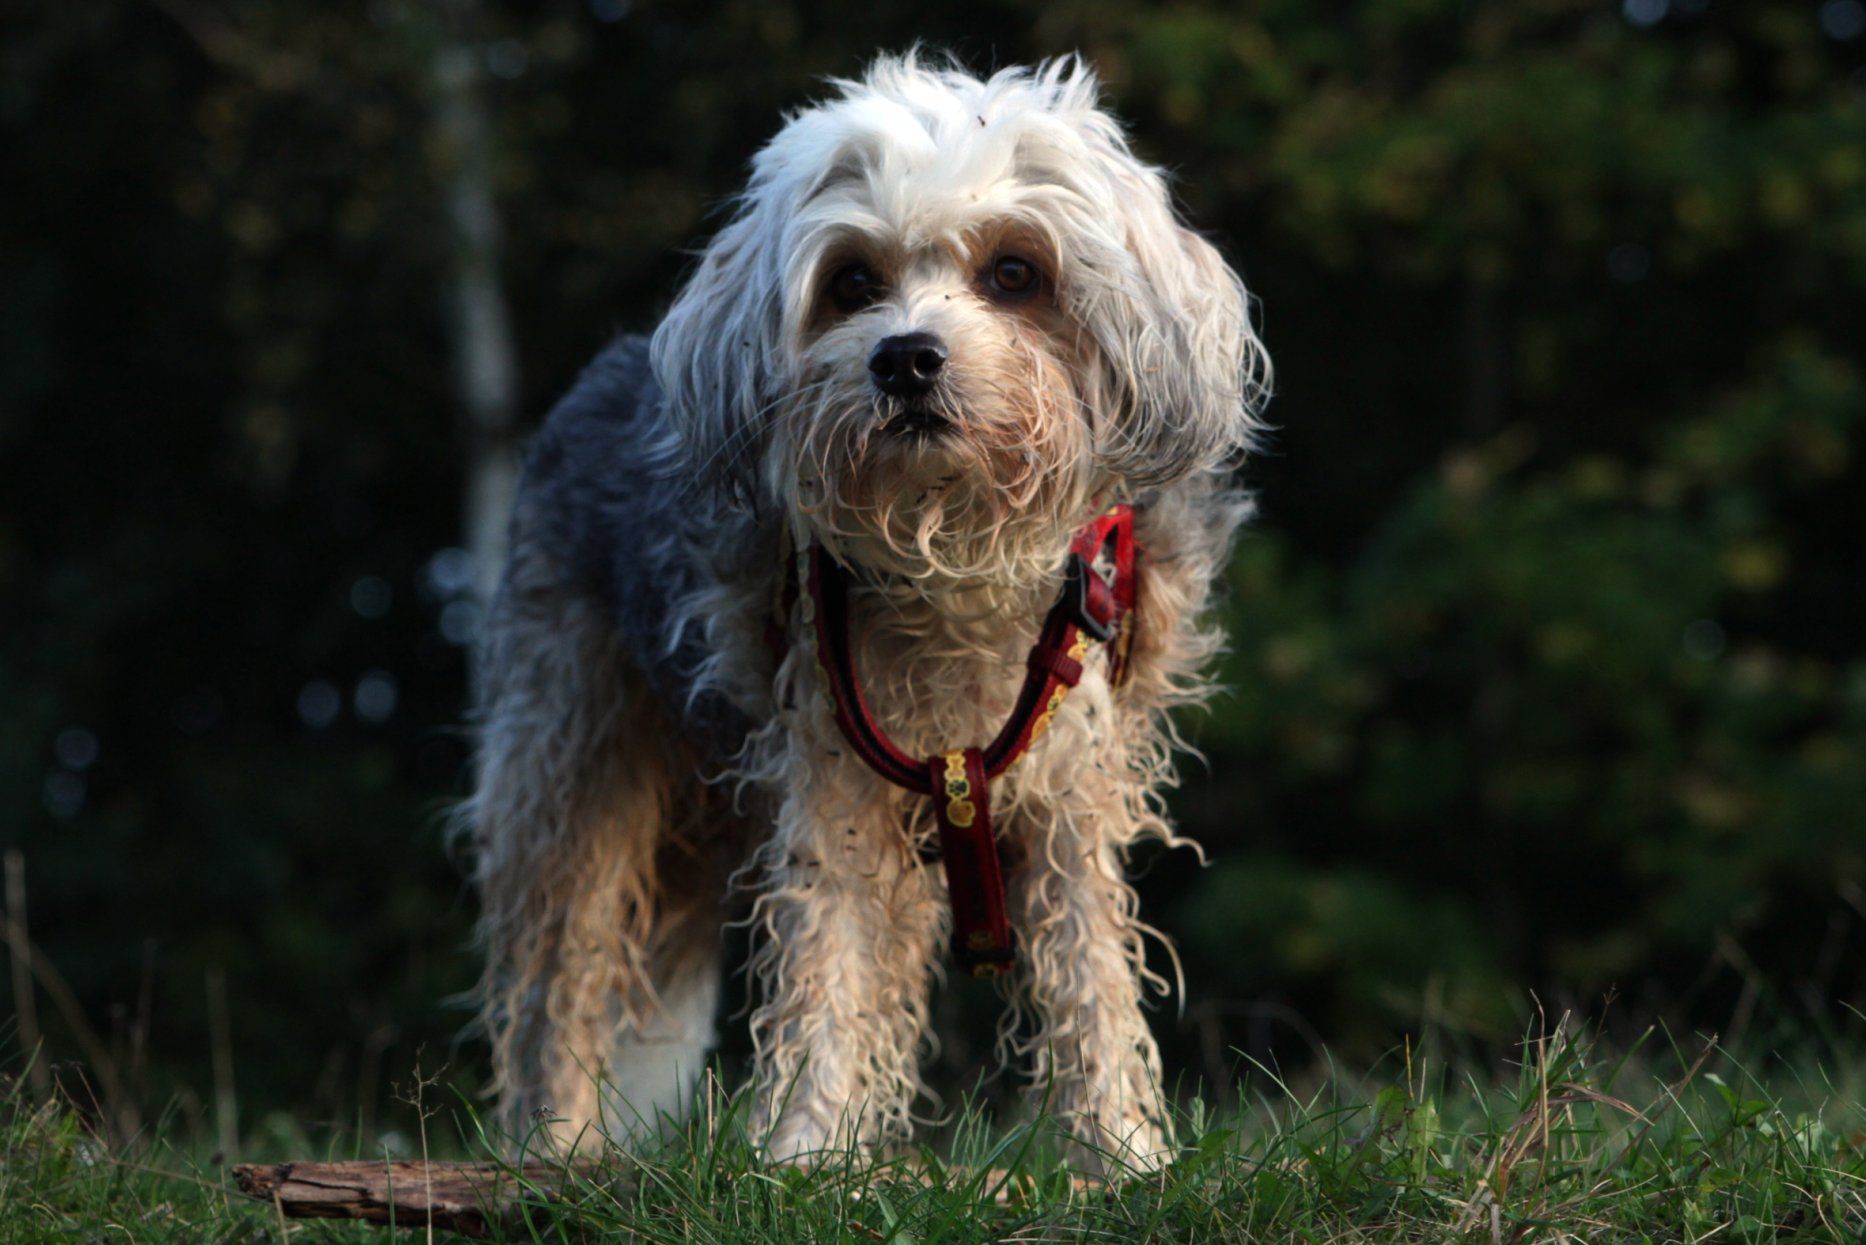 Do Tibetan Terriers Shed Lots of Hair? Lets Take a Look!